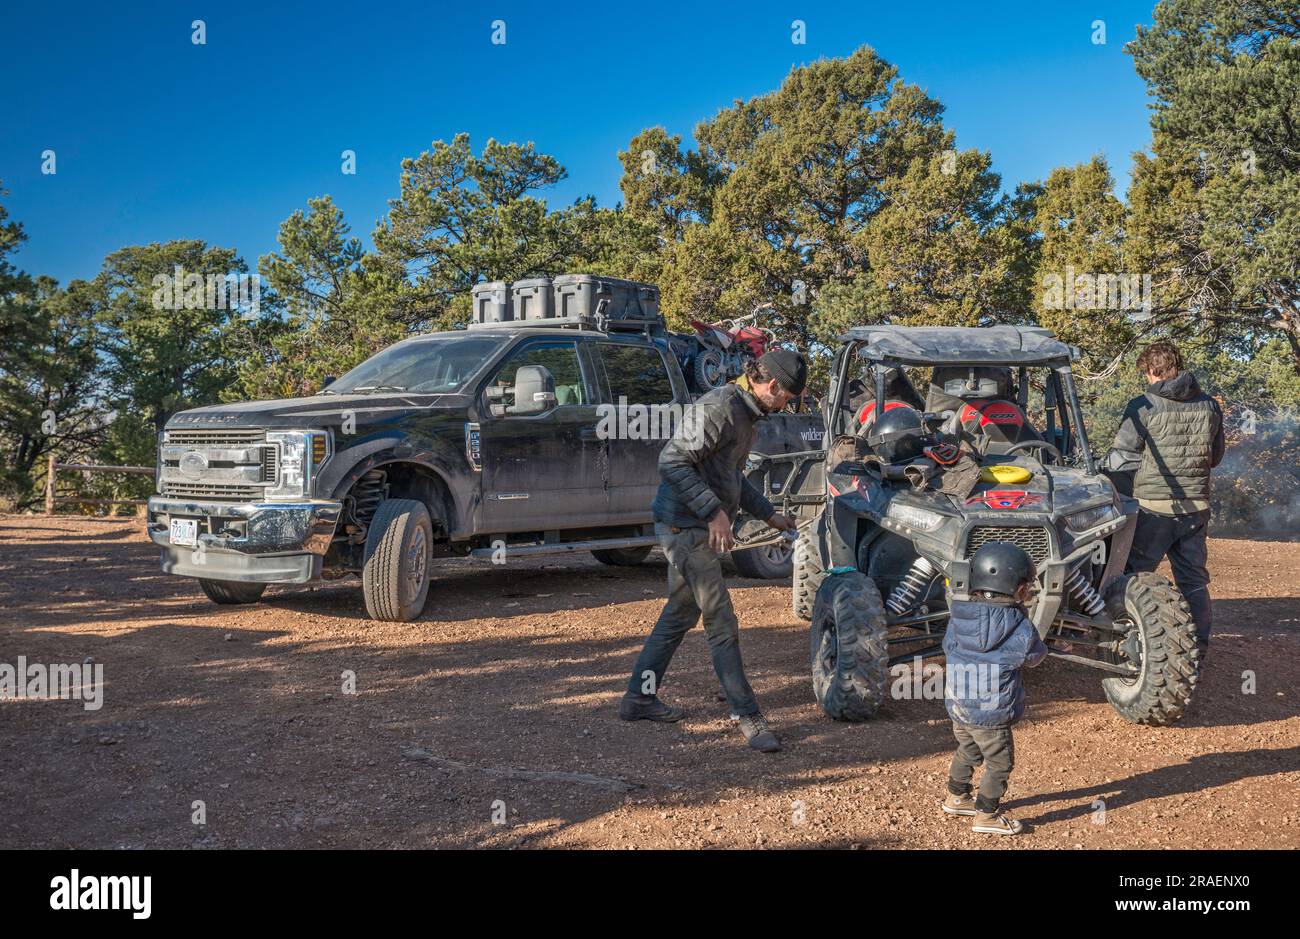 Young adults, child, UTV recreational vehicles, setting up to get going, Crazy Jug Viewpoint area, North Rim of Grand Canyon, Kaibab Plateau, Kaibab National Forest, Arizona, USA Stock Photo